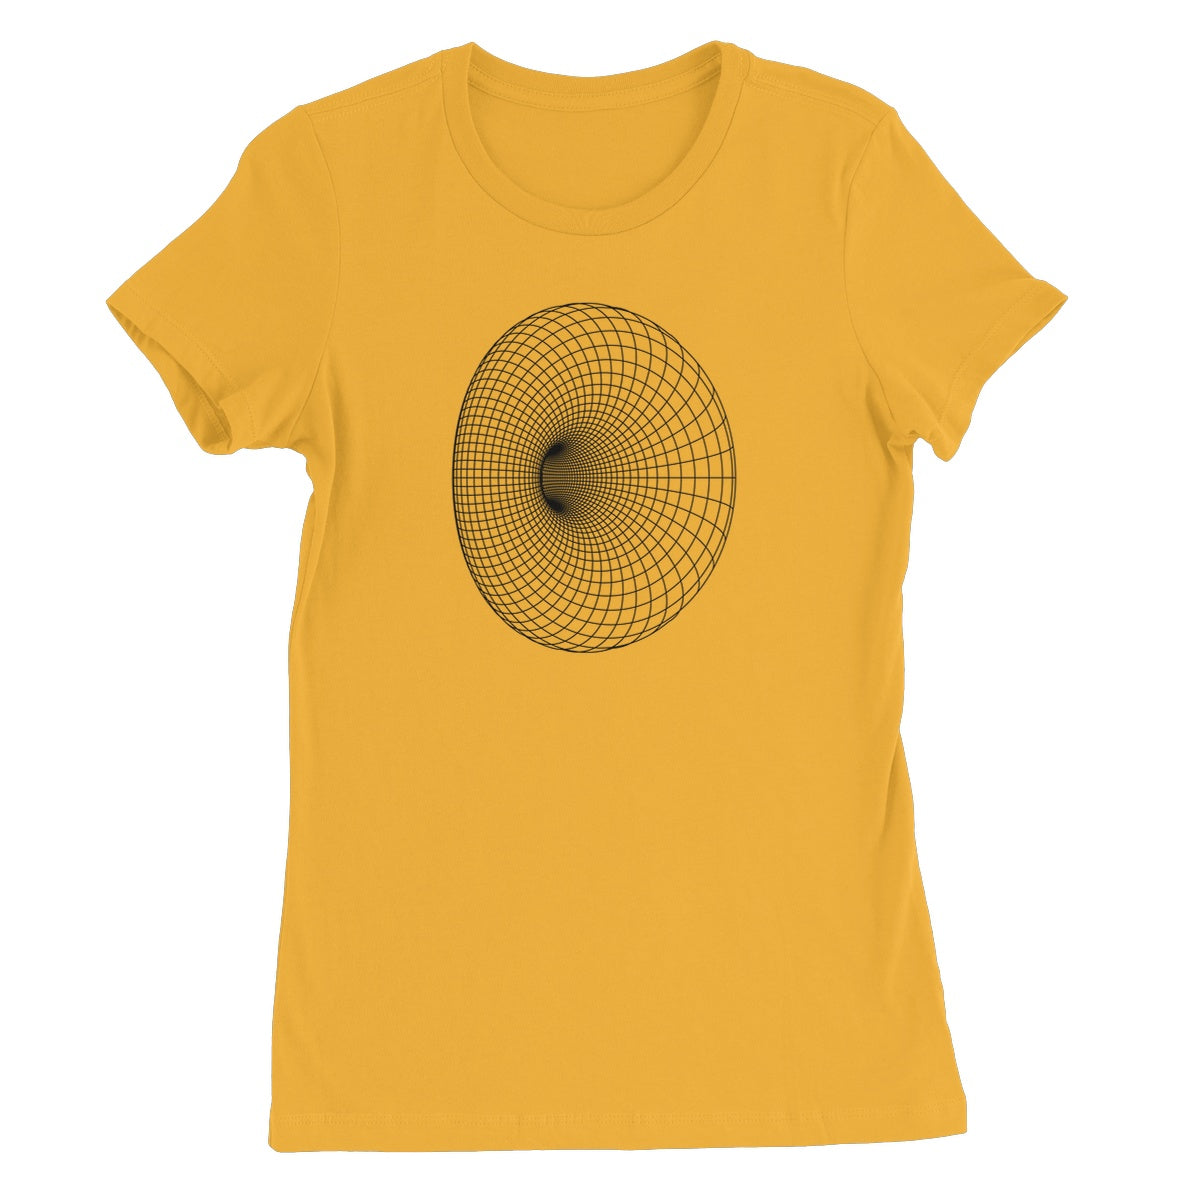 A mustard-colored women's T-shirt with a black toroidal surface mesh